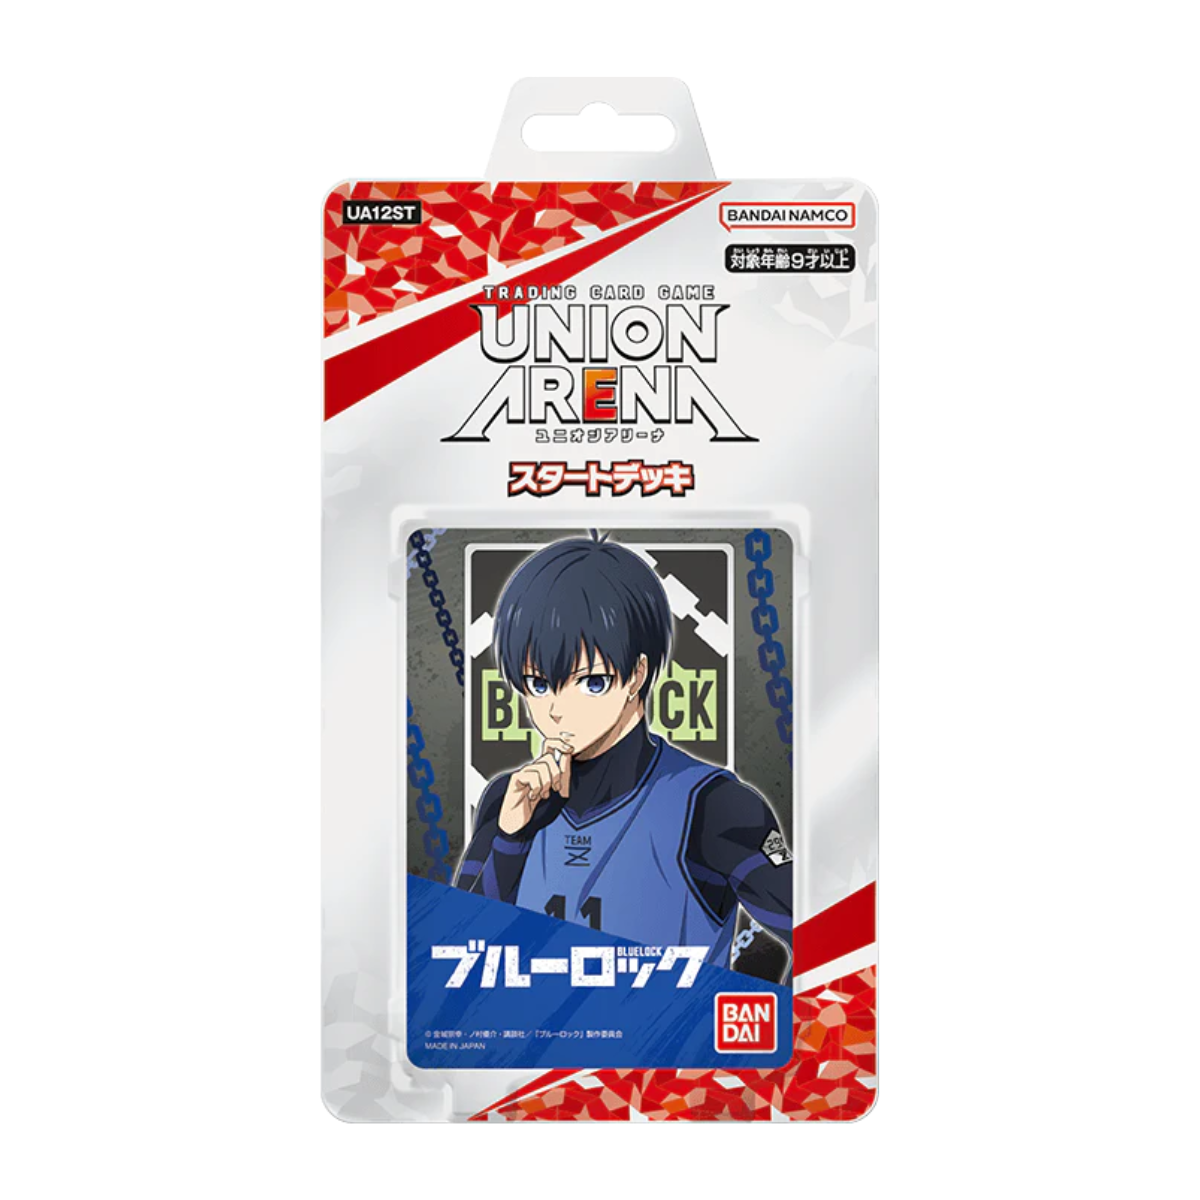 Union Arena TCG Blue Lock Starter Deck-Bandai Namco-Ace Cards & Collectibles